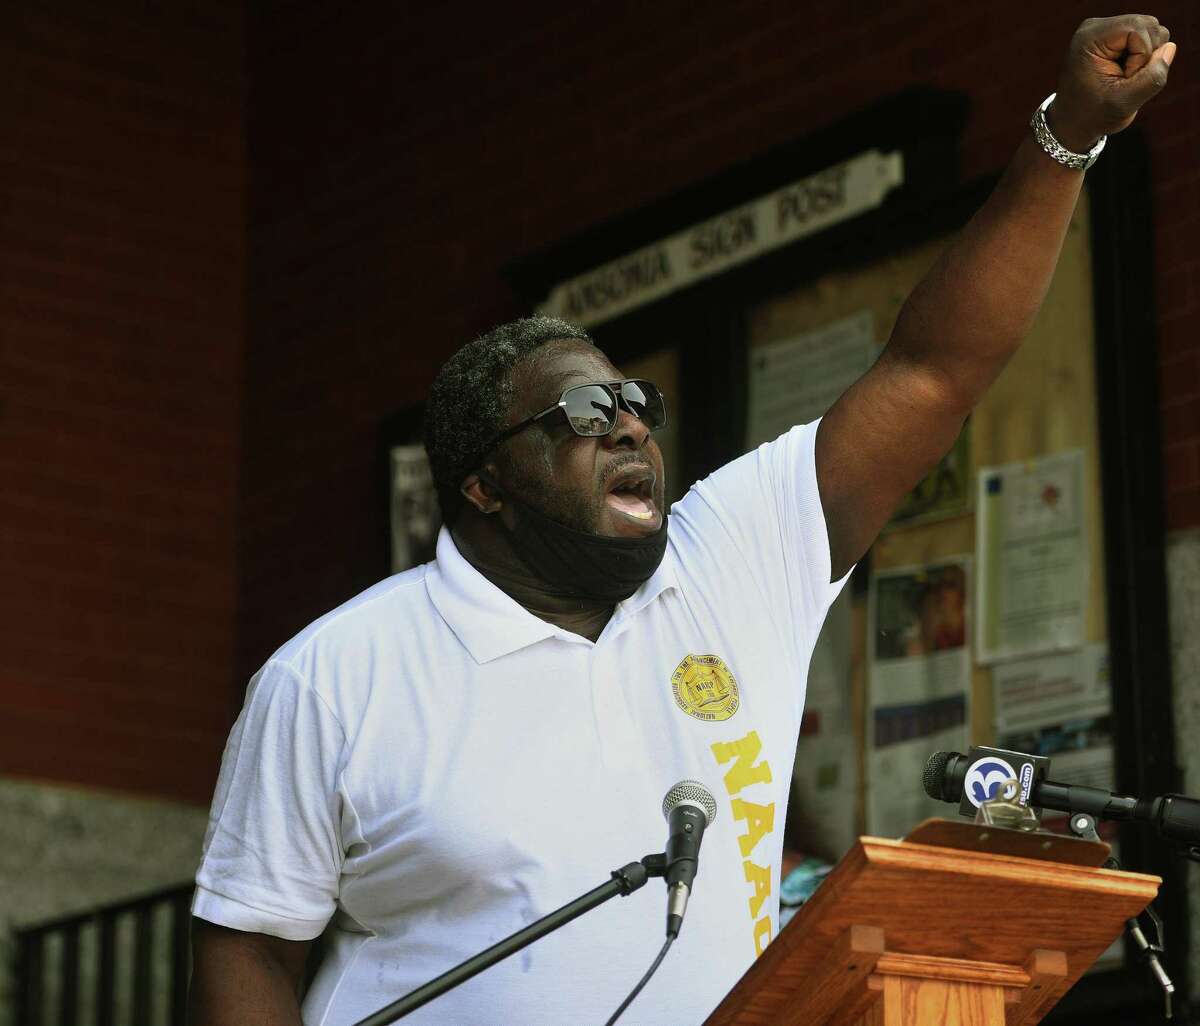 A chant of "Black Lives Matter" is lead by Valley NAACP head Greg Johnson during a gathering of local ministers, political leaders and residents outside City Hall on Main Street in Ansonia, Conn. on Thursday, June 4, 2020.